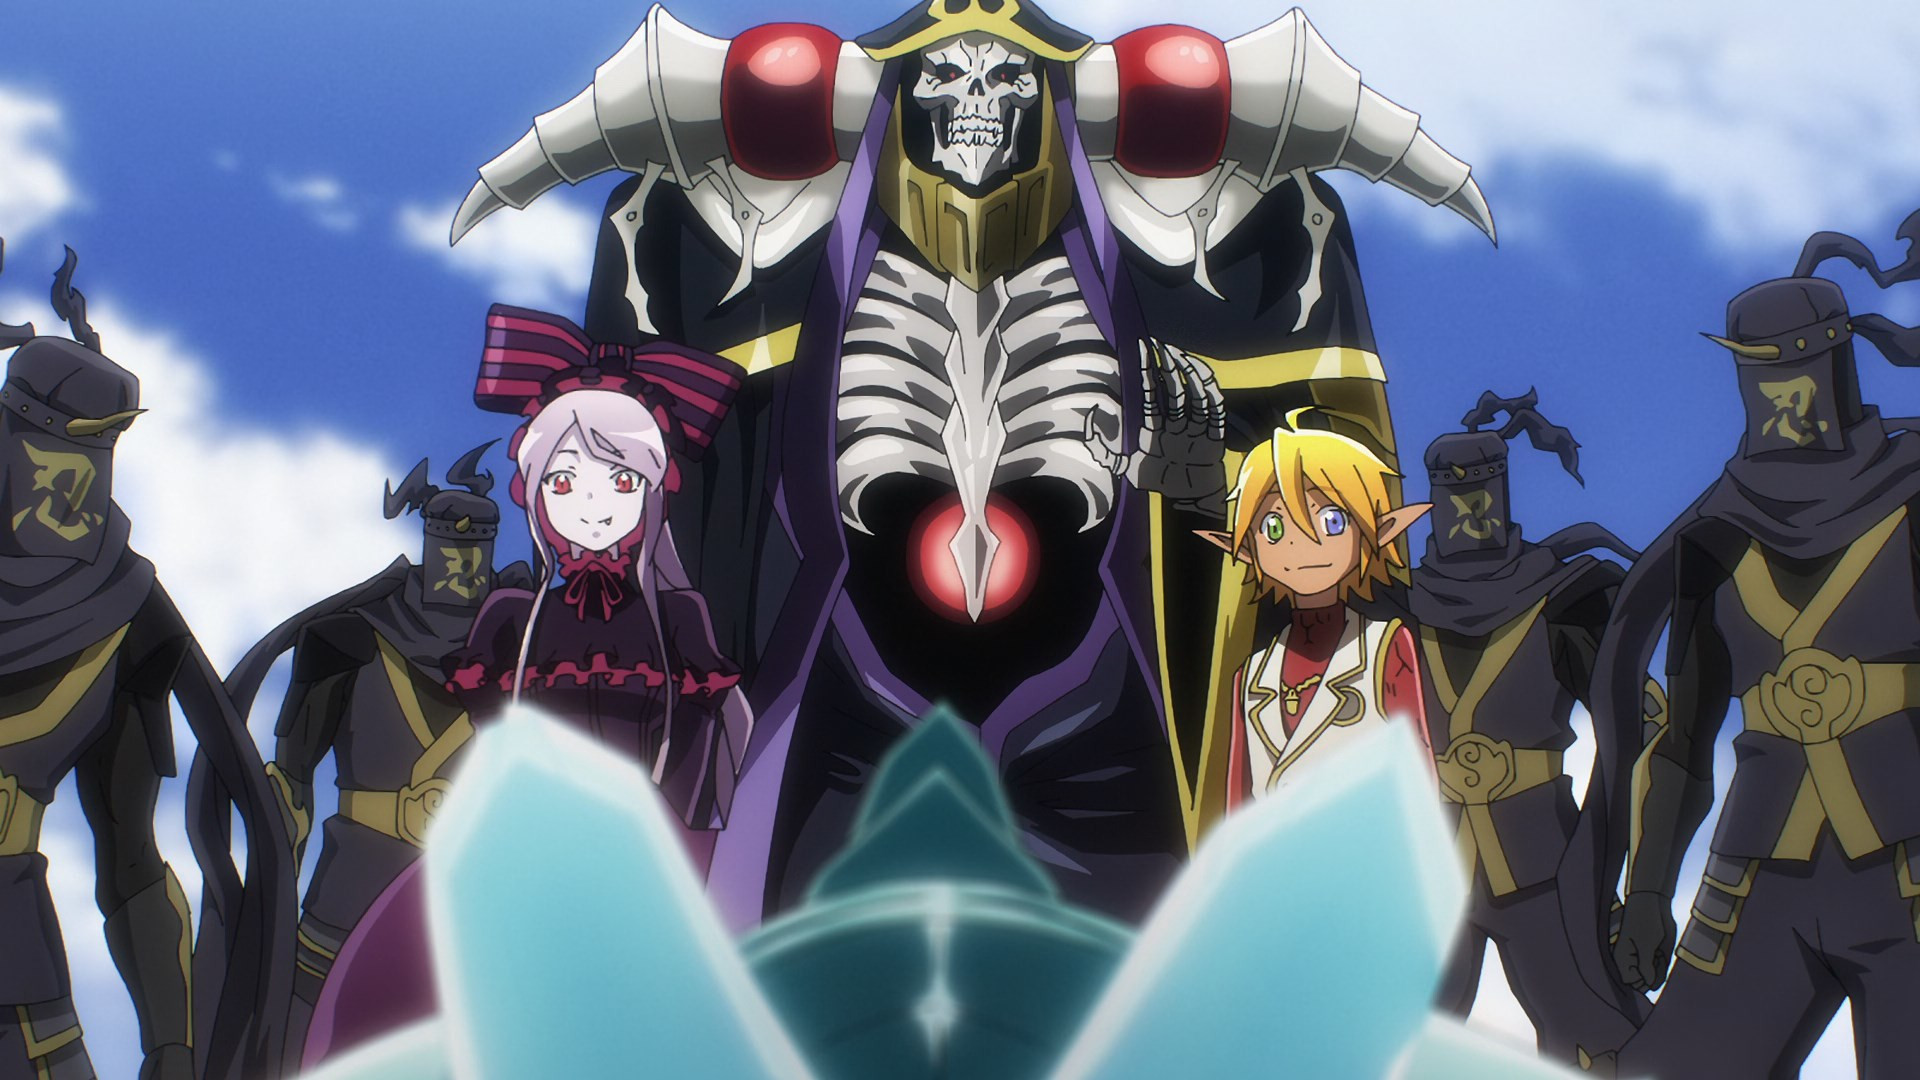 Overlord IV - 05